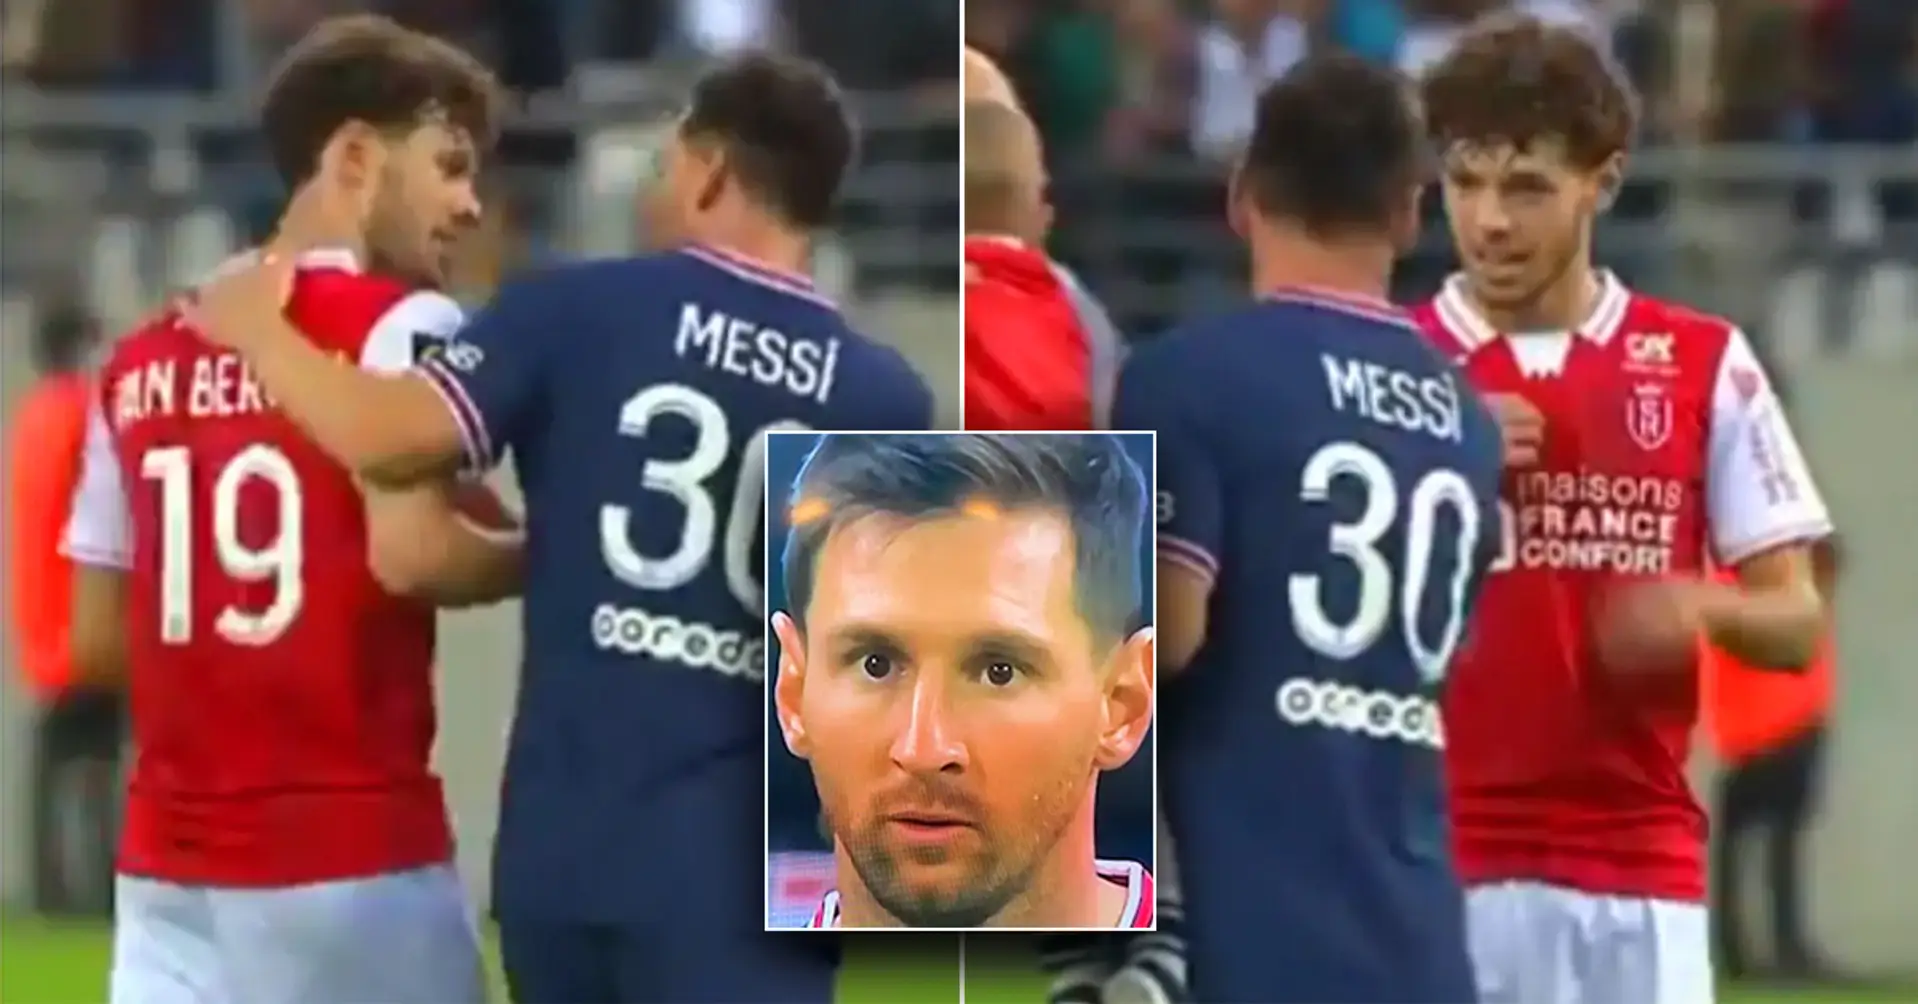 Caught on camera: what happened between Lionel Messi and 22-year-old Reims player 